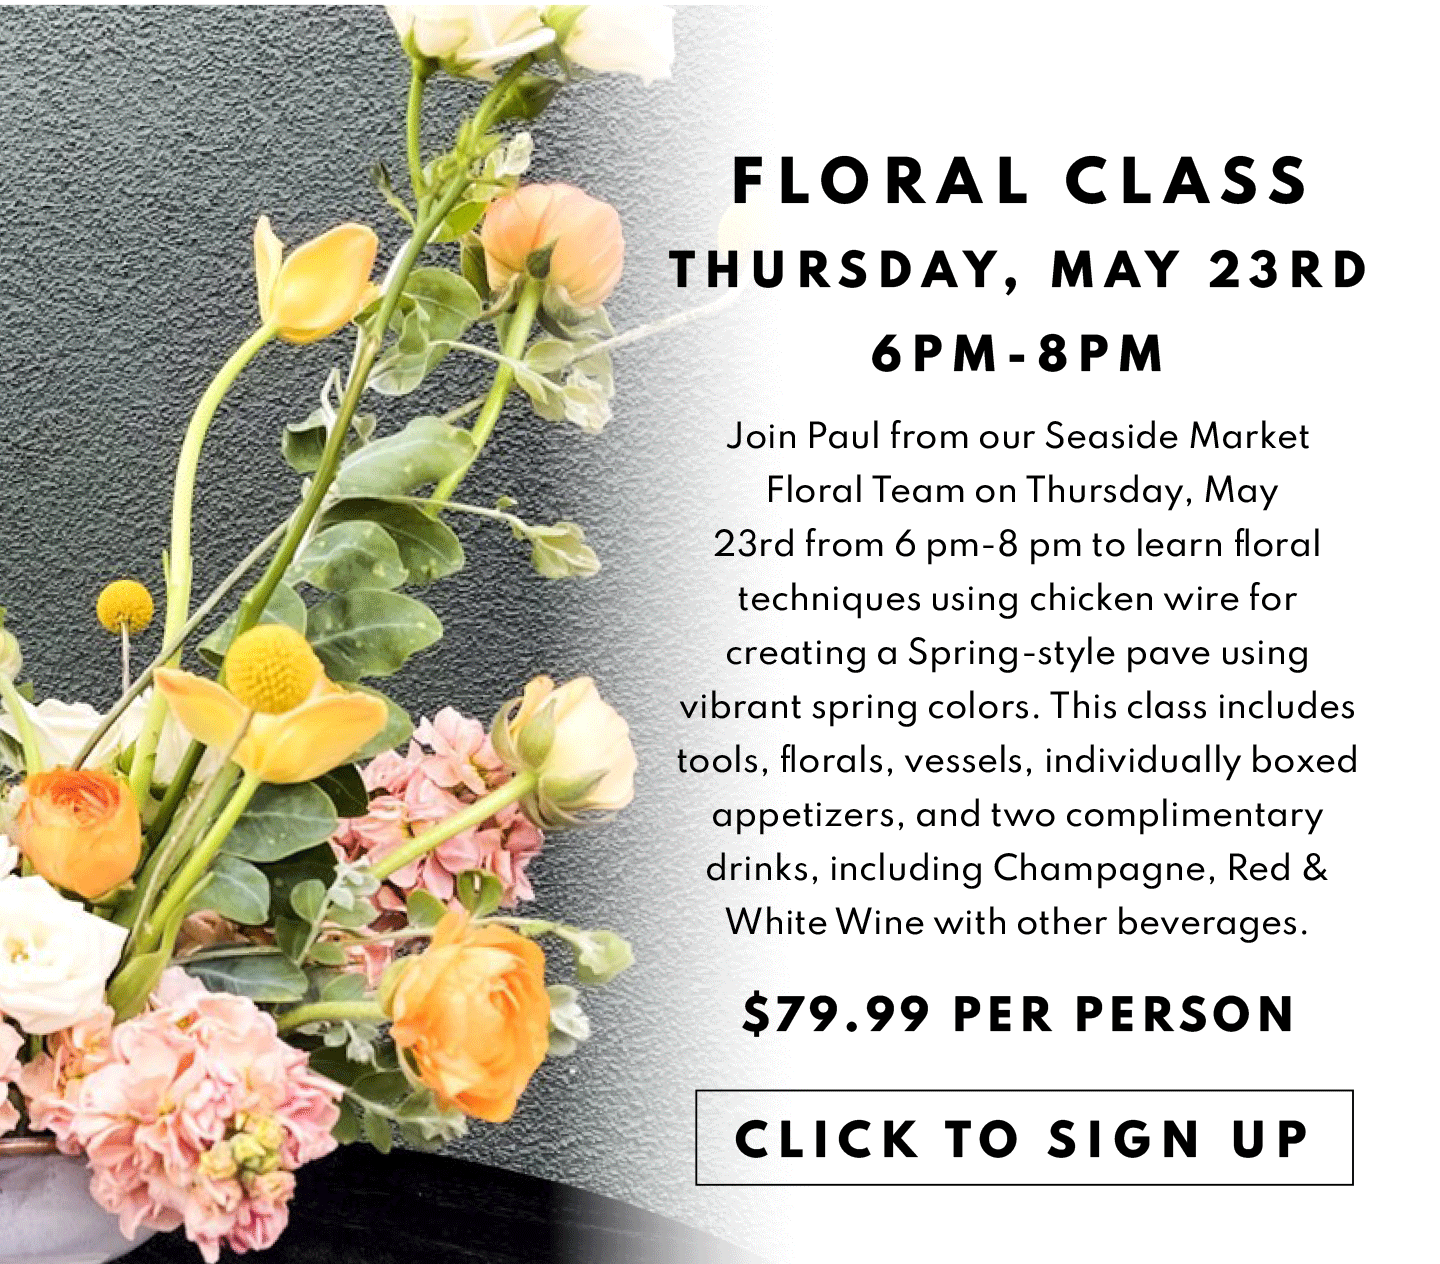 Floral Class Thurs, May 23rd, 6PM-8Pm $79.99 per person